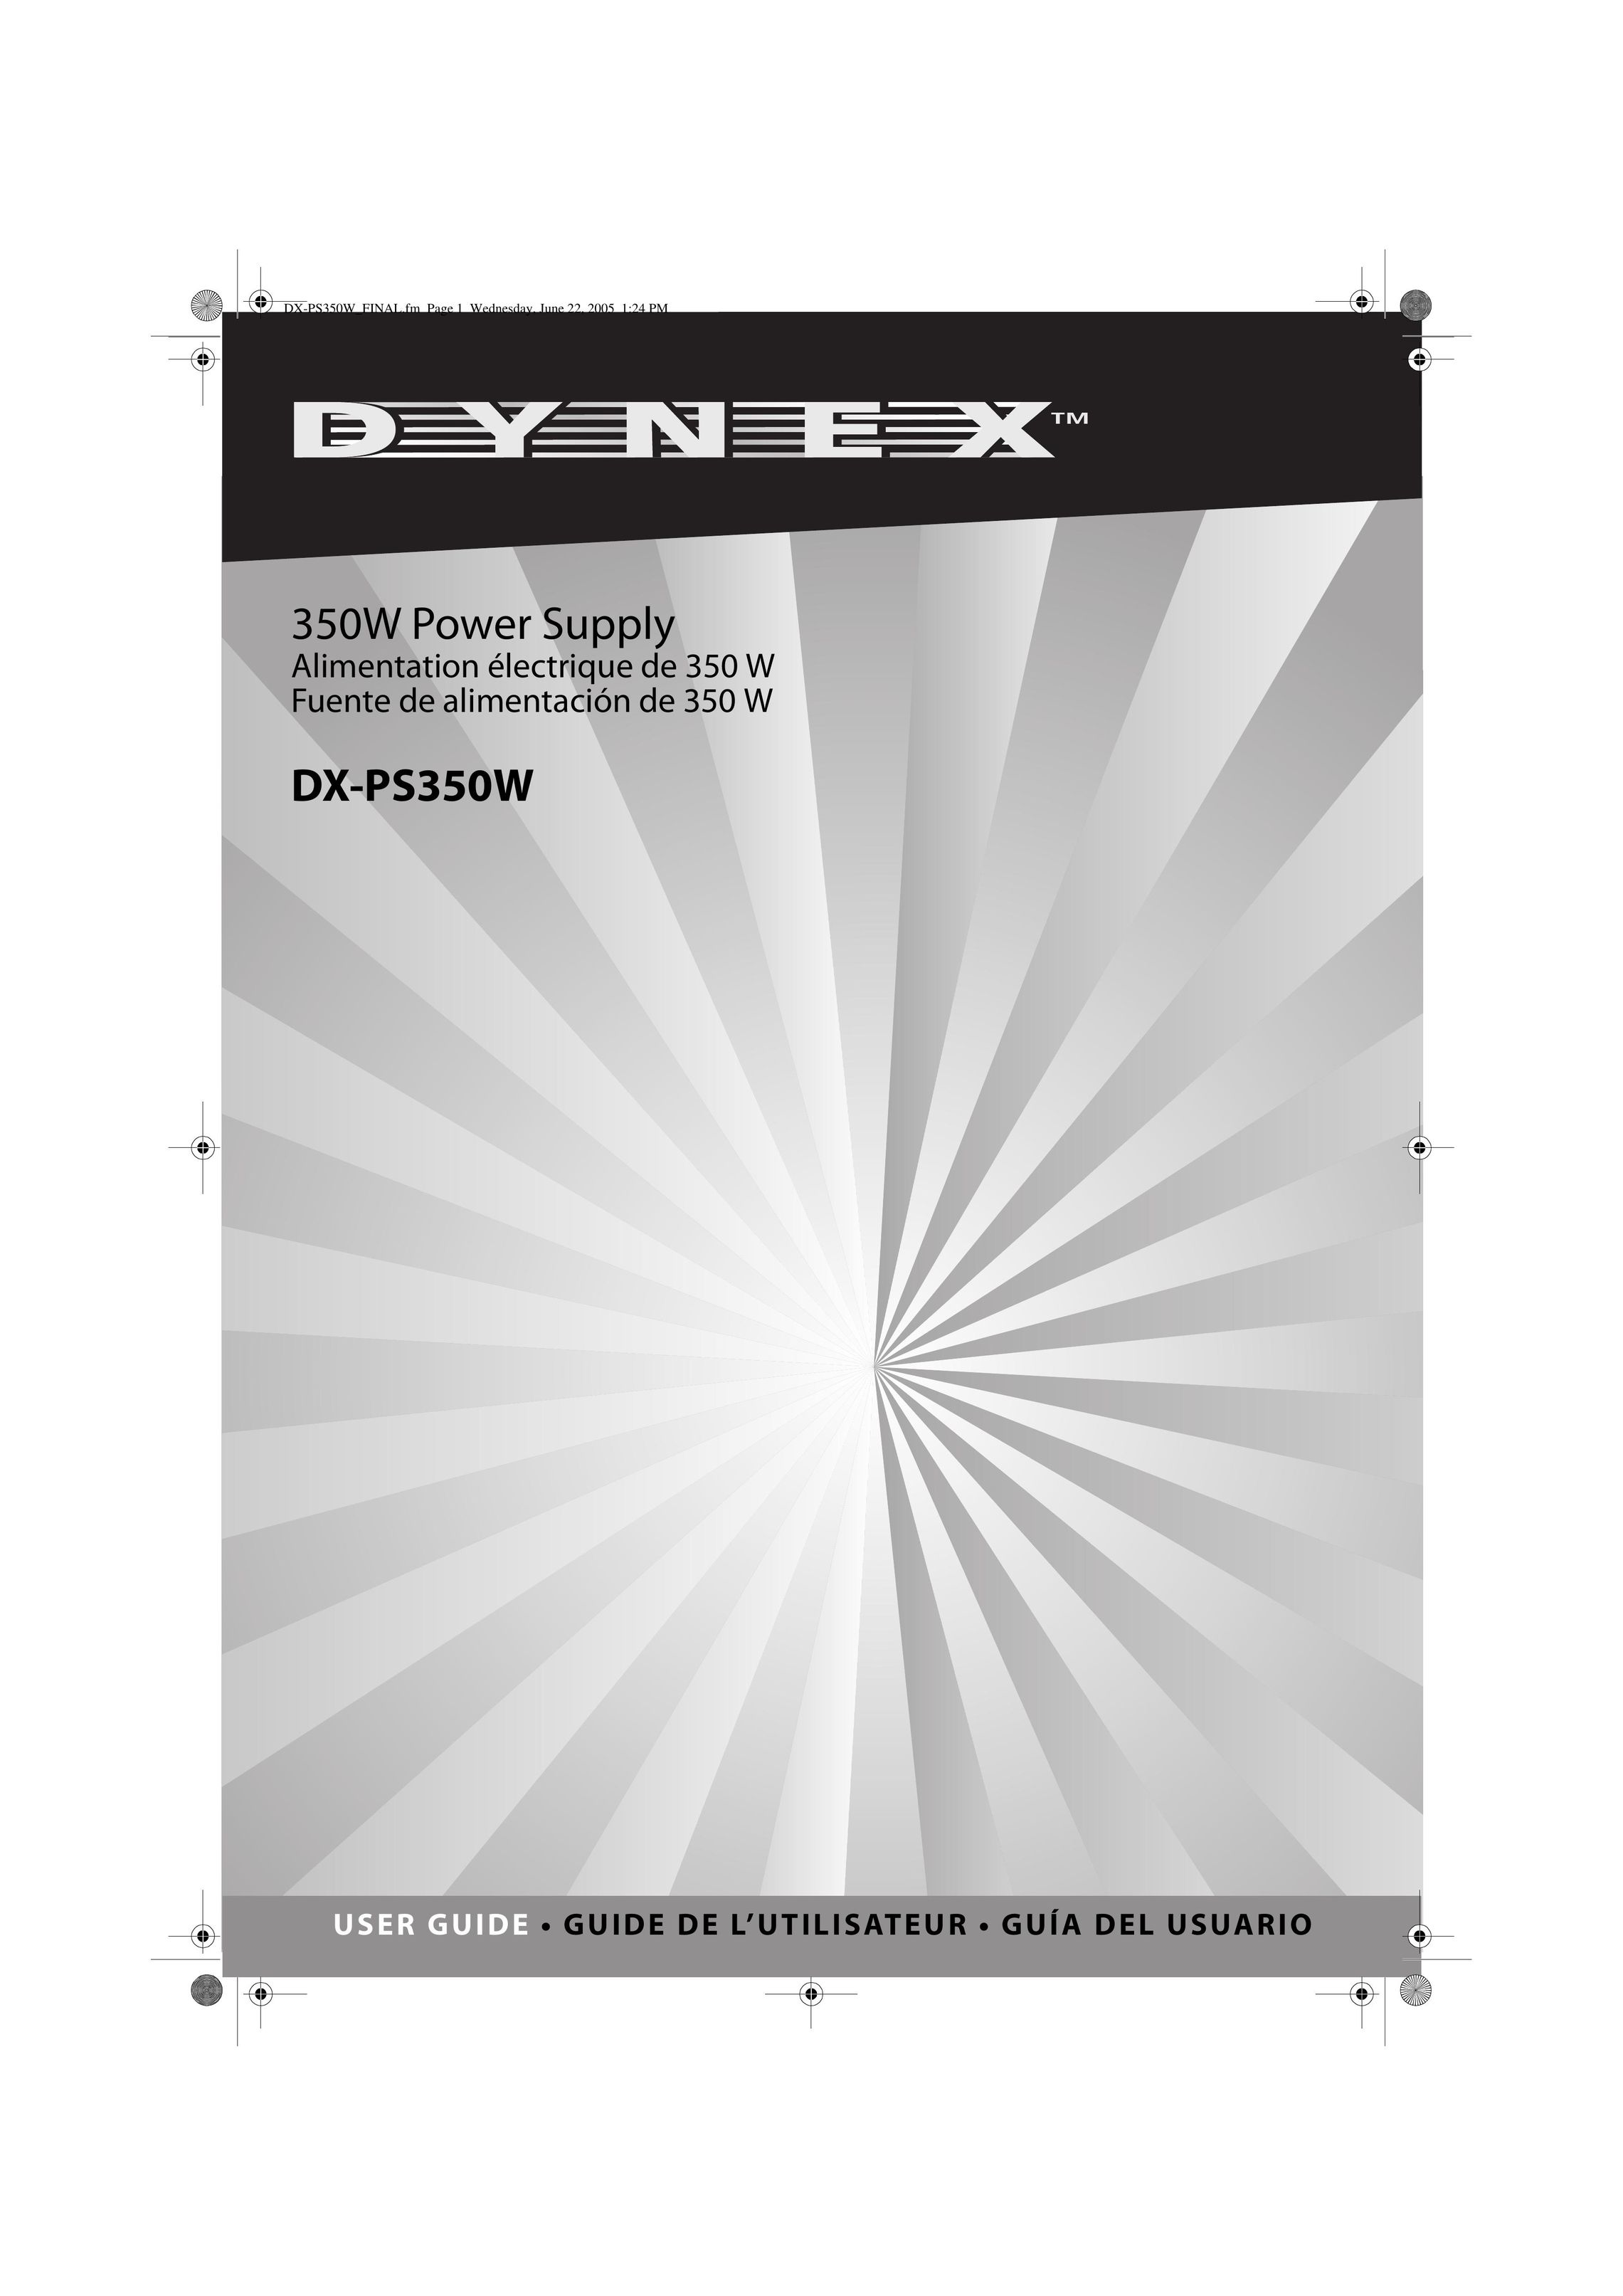 Dynex DX-PS350W Power Supply User Manual (Page 1)